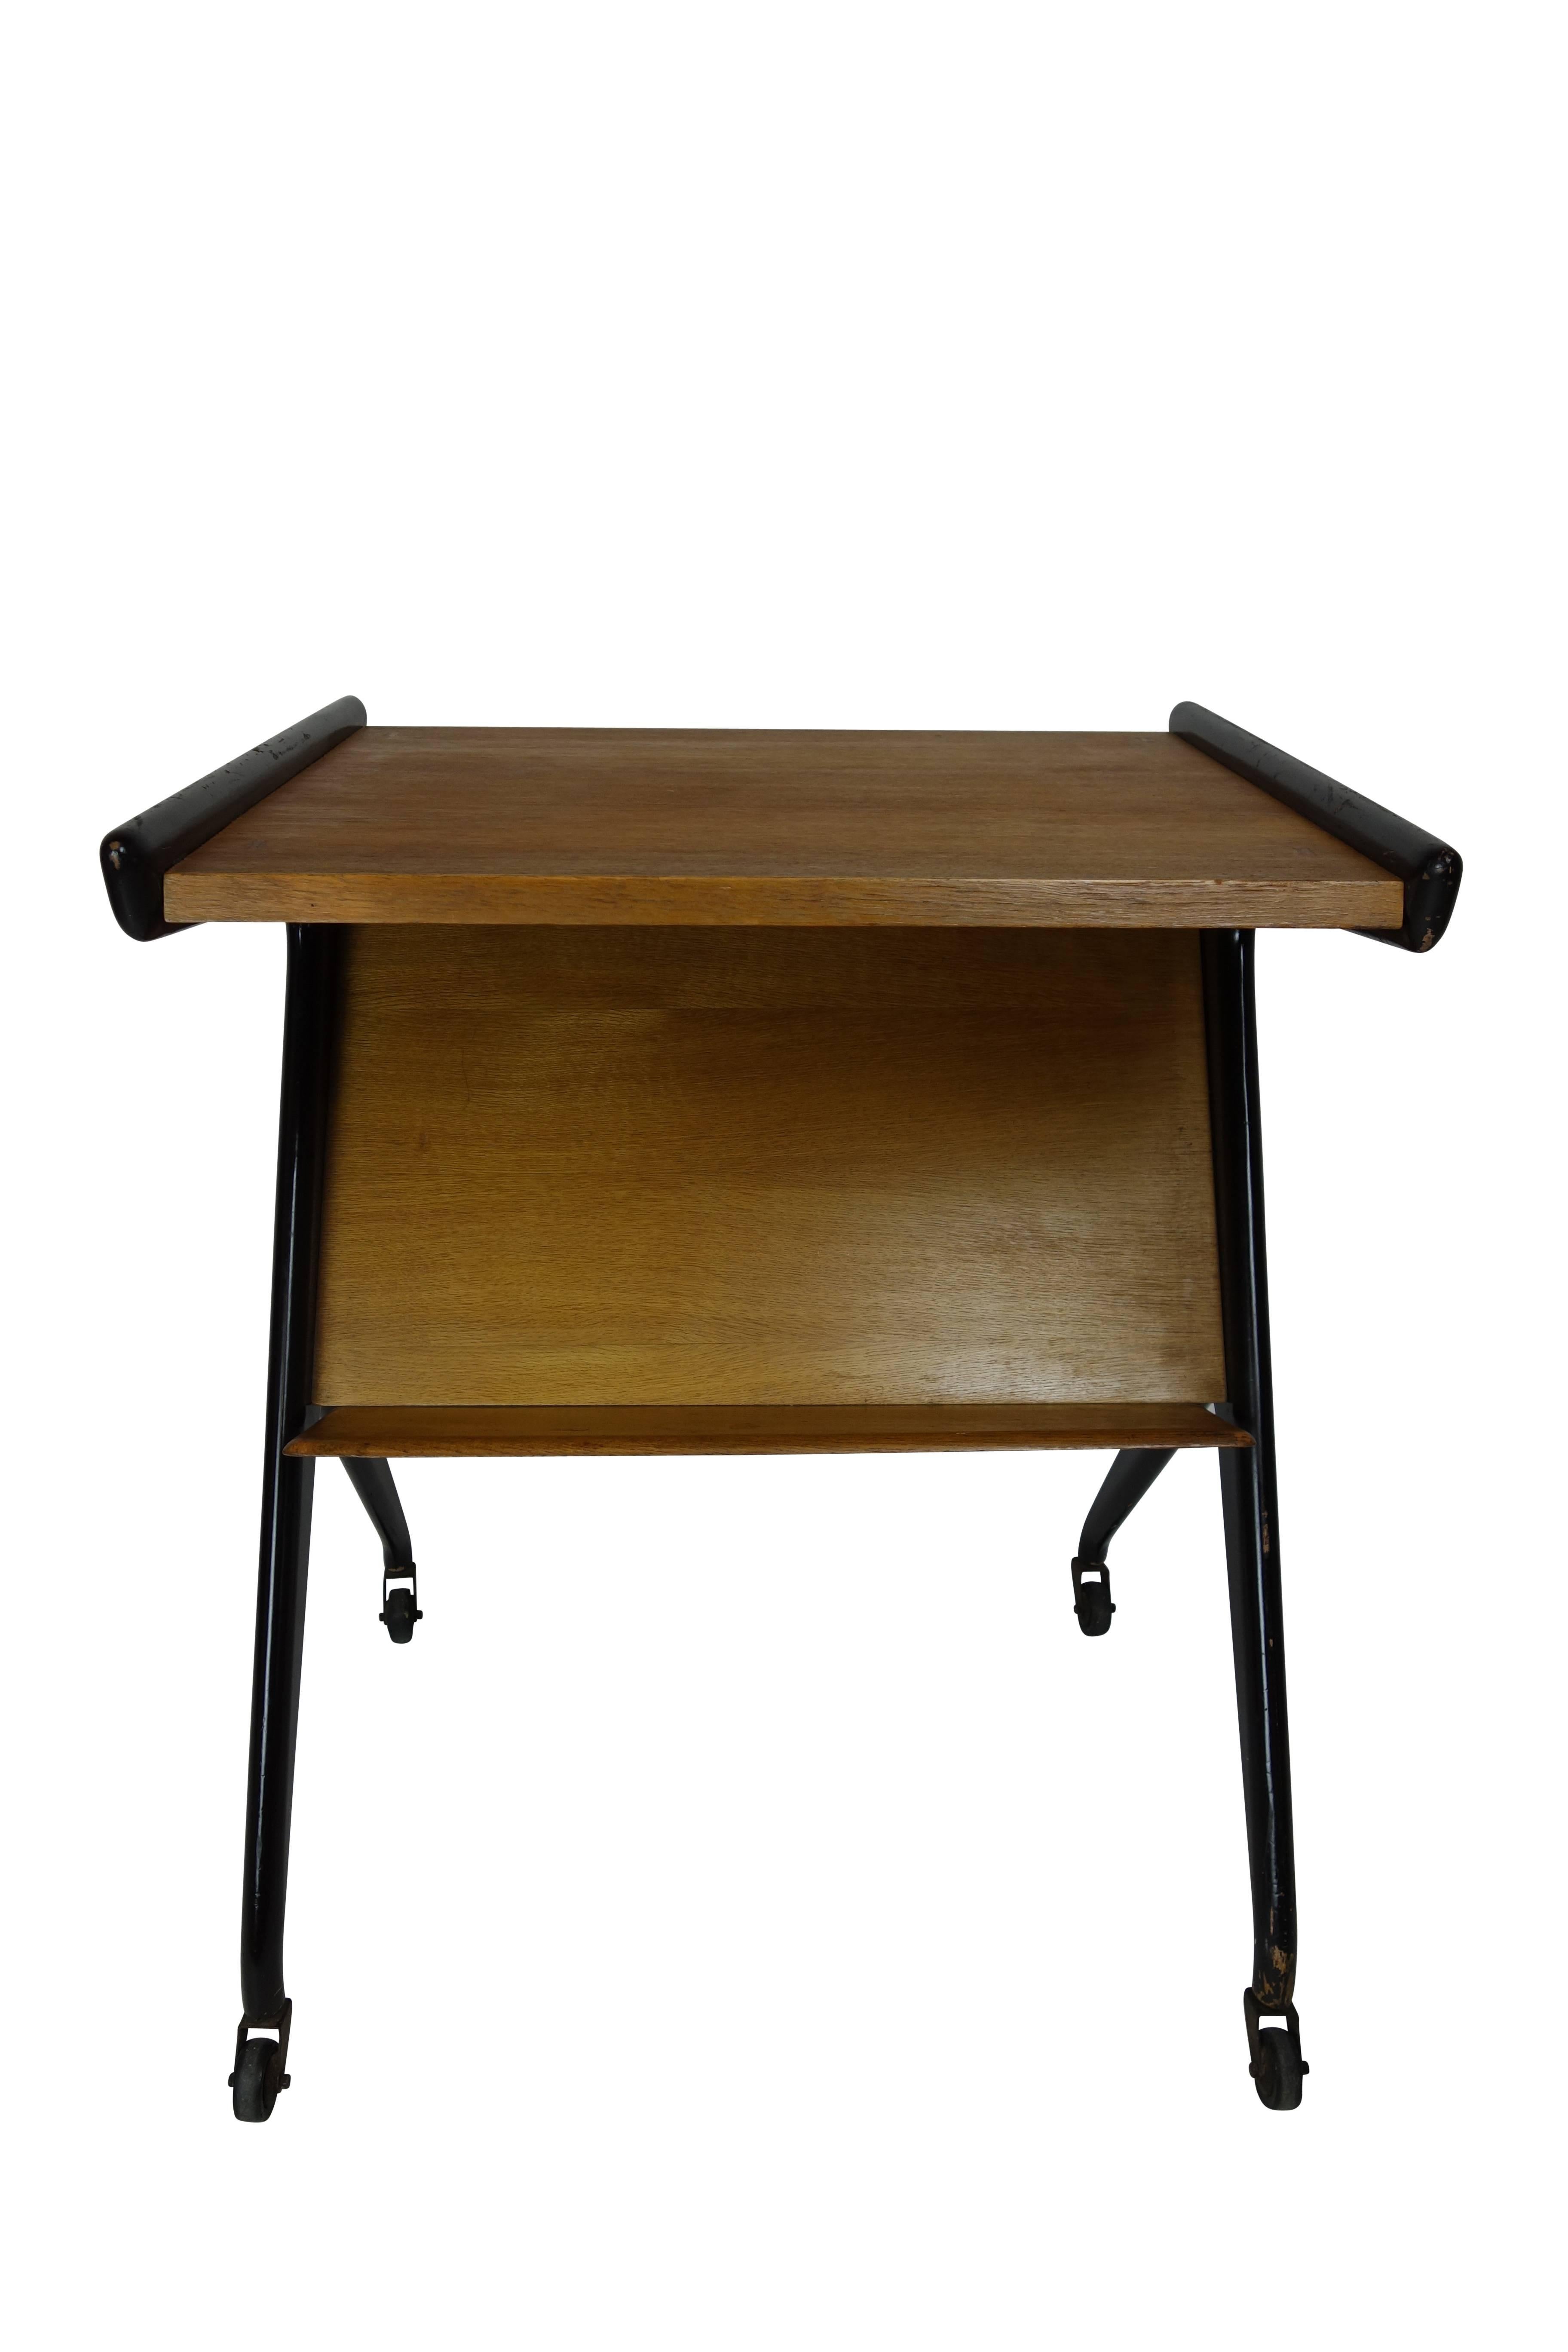 This is an atomic era French Teleavia occasional table on casters, originally designed for a television set, circa 1950.